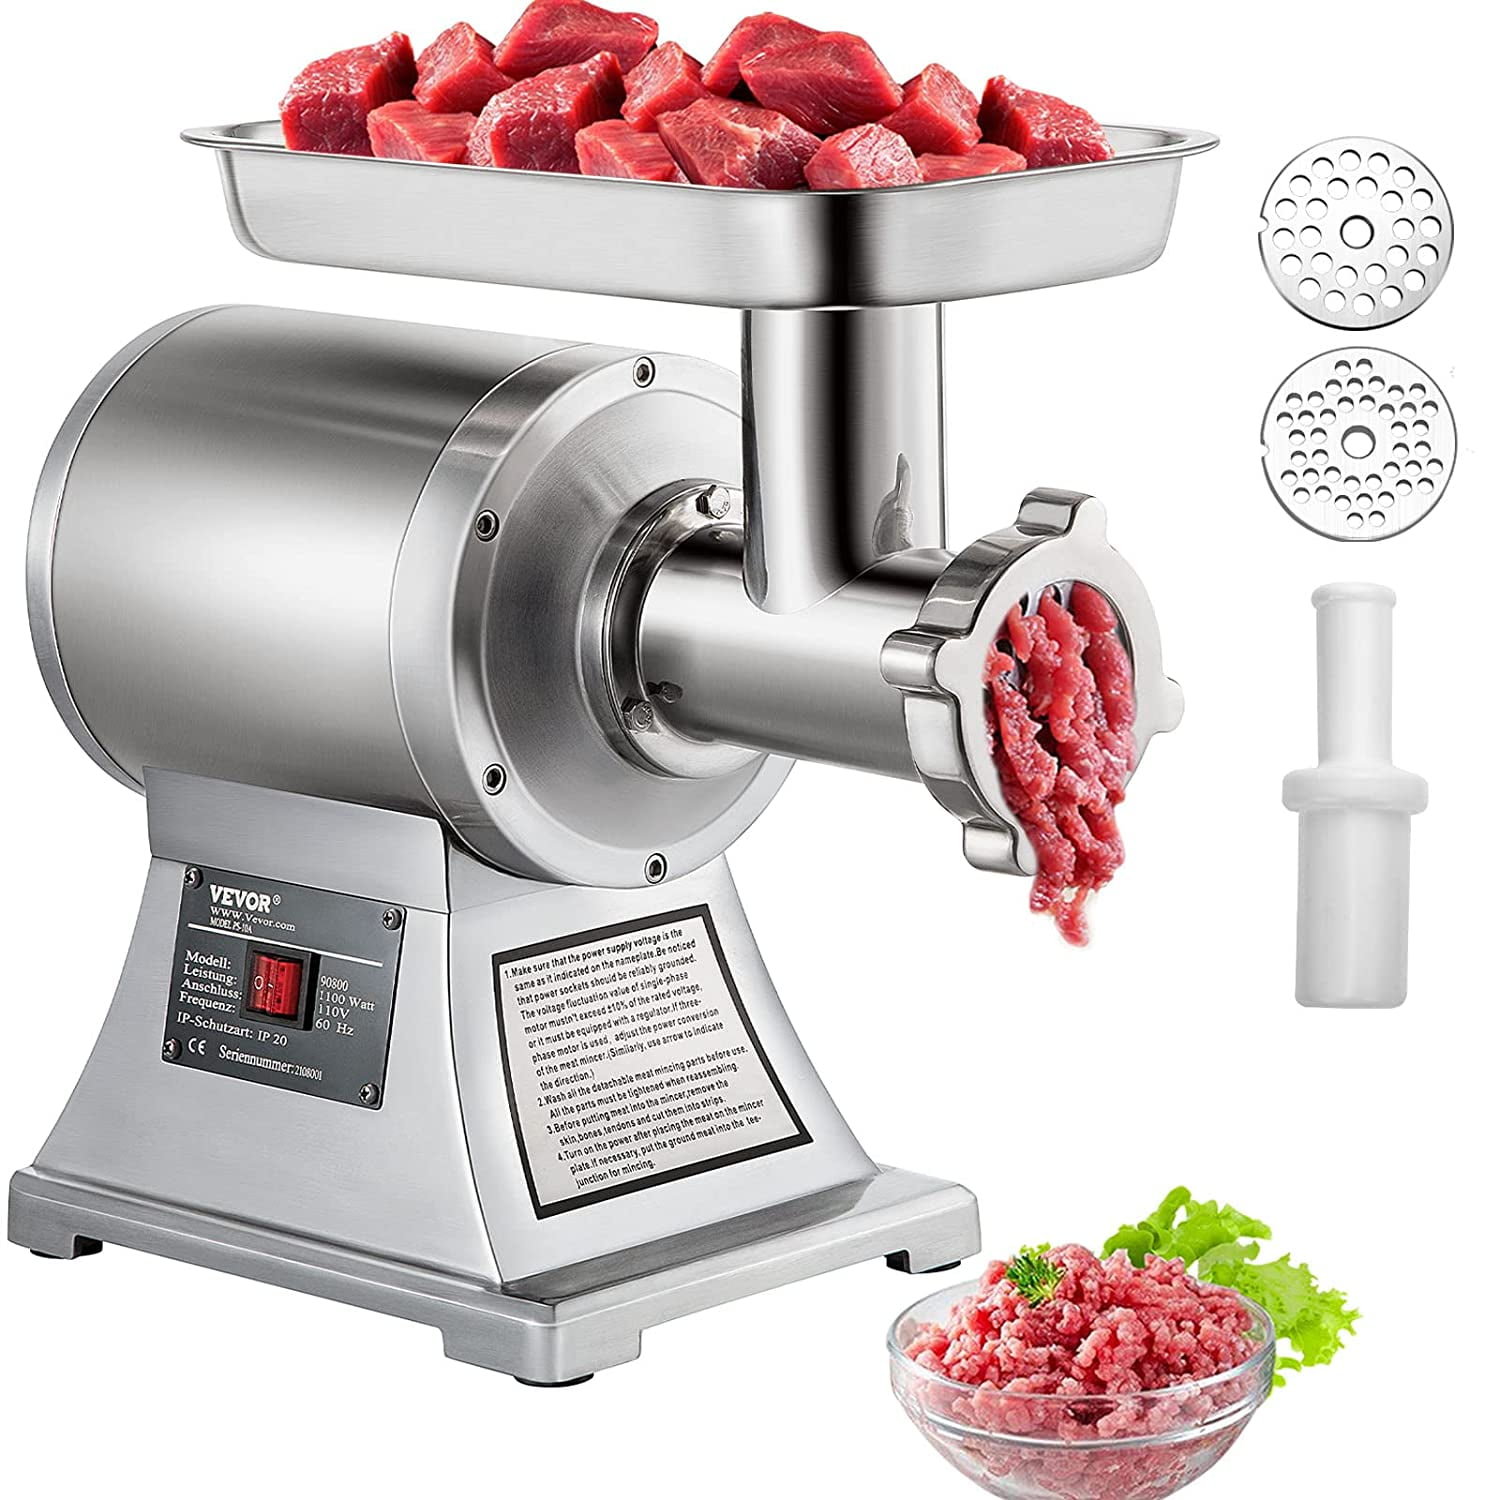 donlim Compact Electric Meat Grinder & Food Processor - Blue 